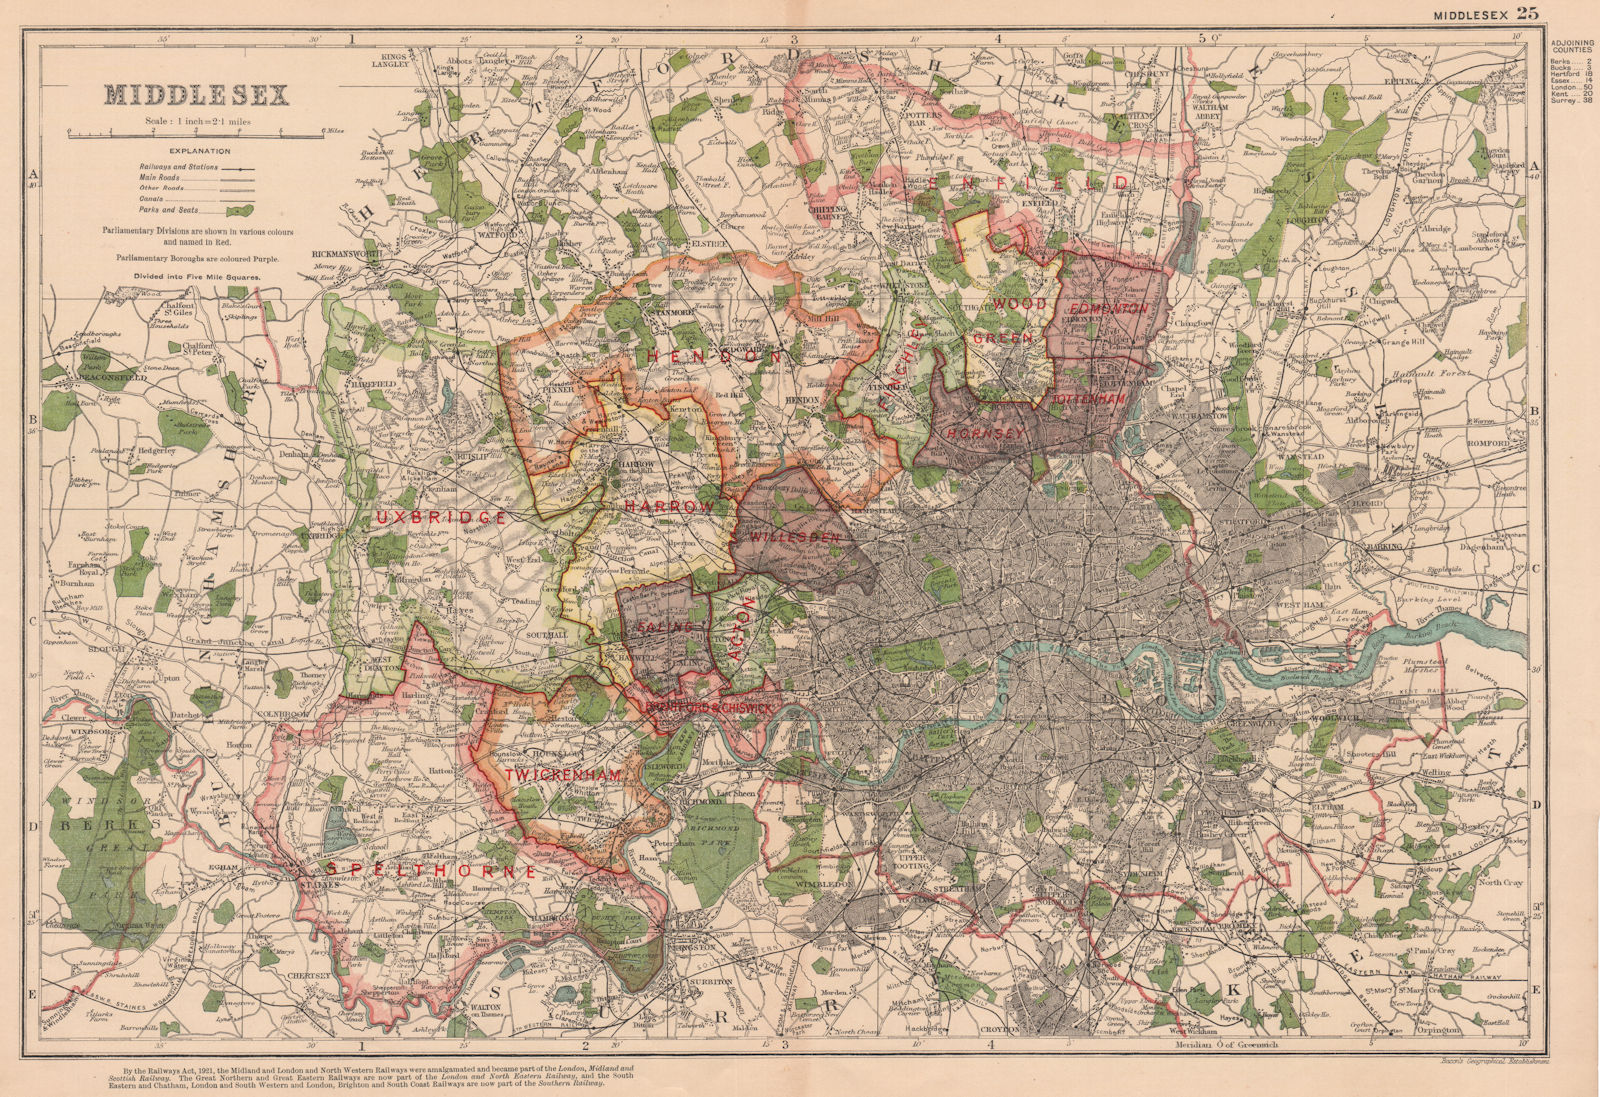 Associate Product MIDDLESEX showing Parliamentary divisions,boroughs & parks.London.BACON 1927 map